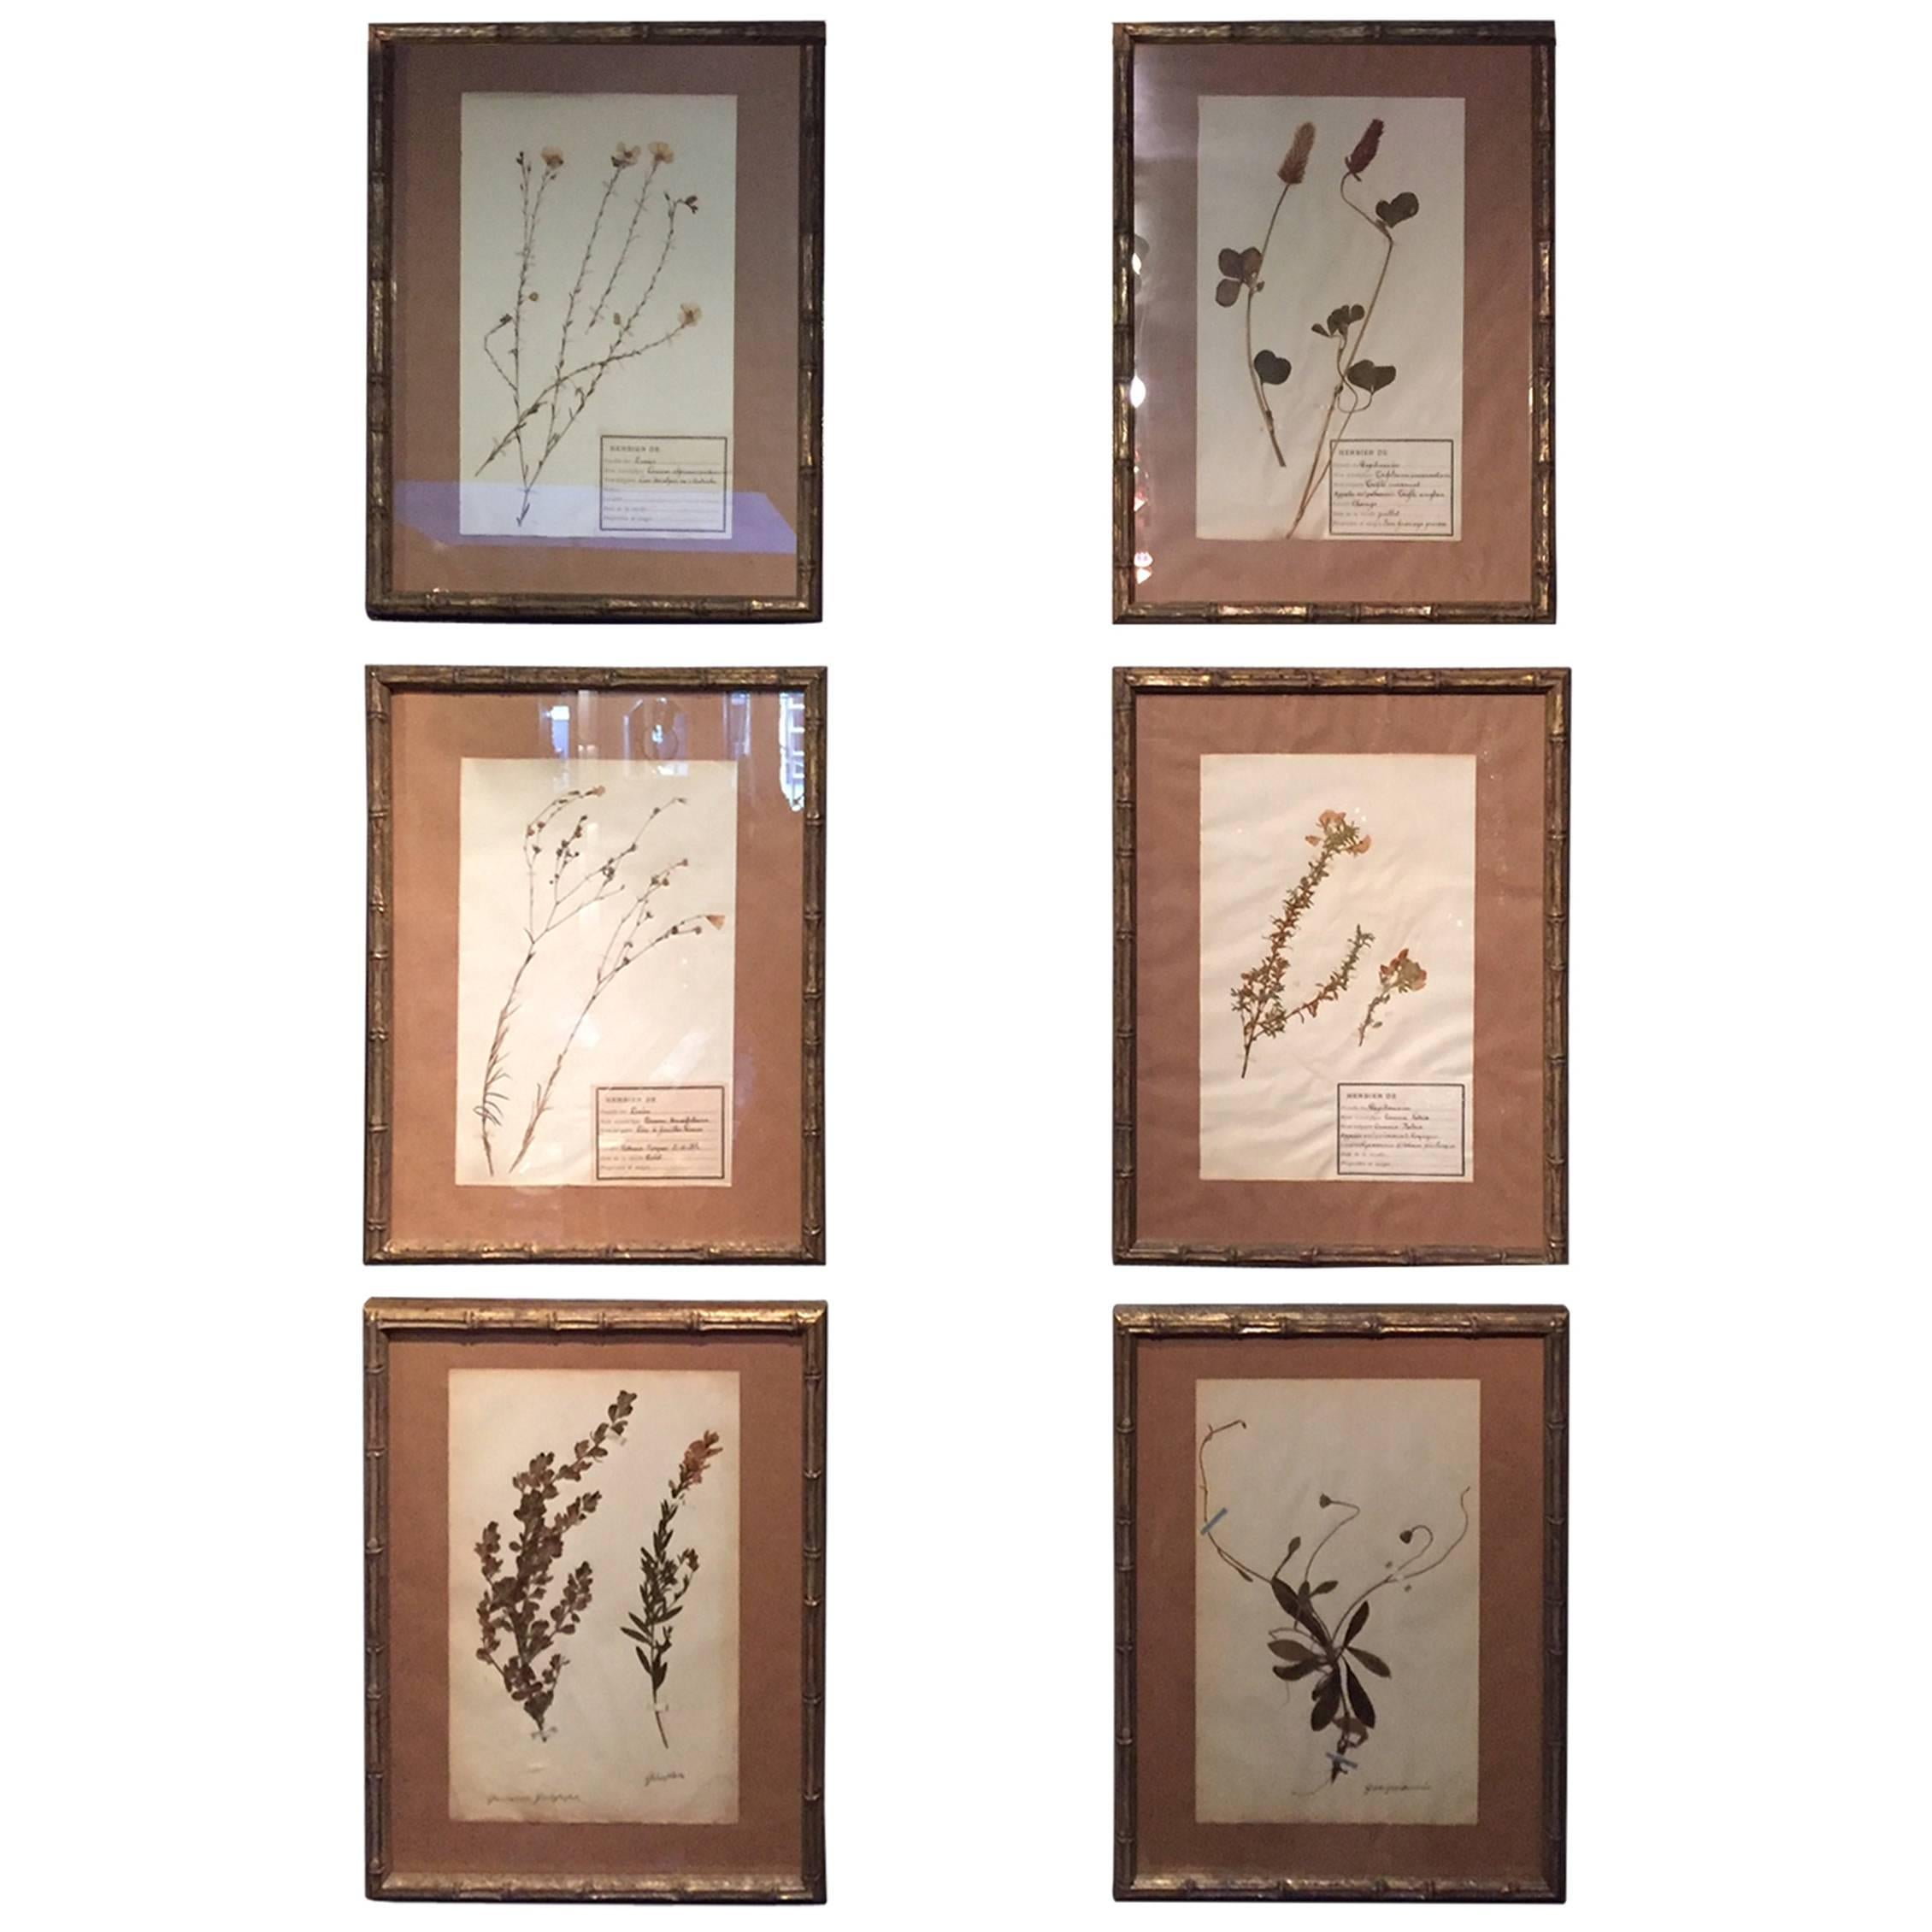 Late 19th Century Framed and Pressed French Herbier "Pressed Plant" Specimens